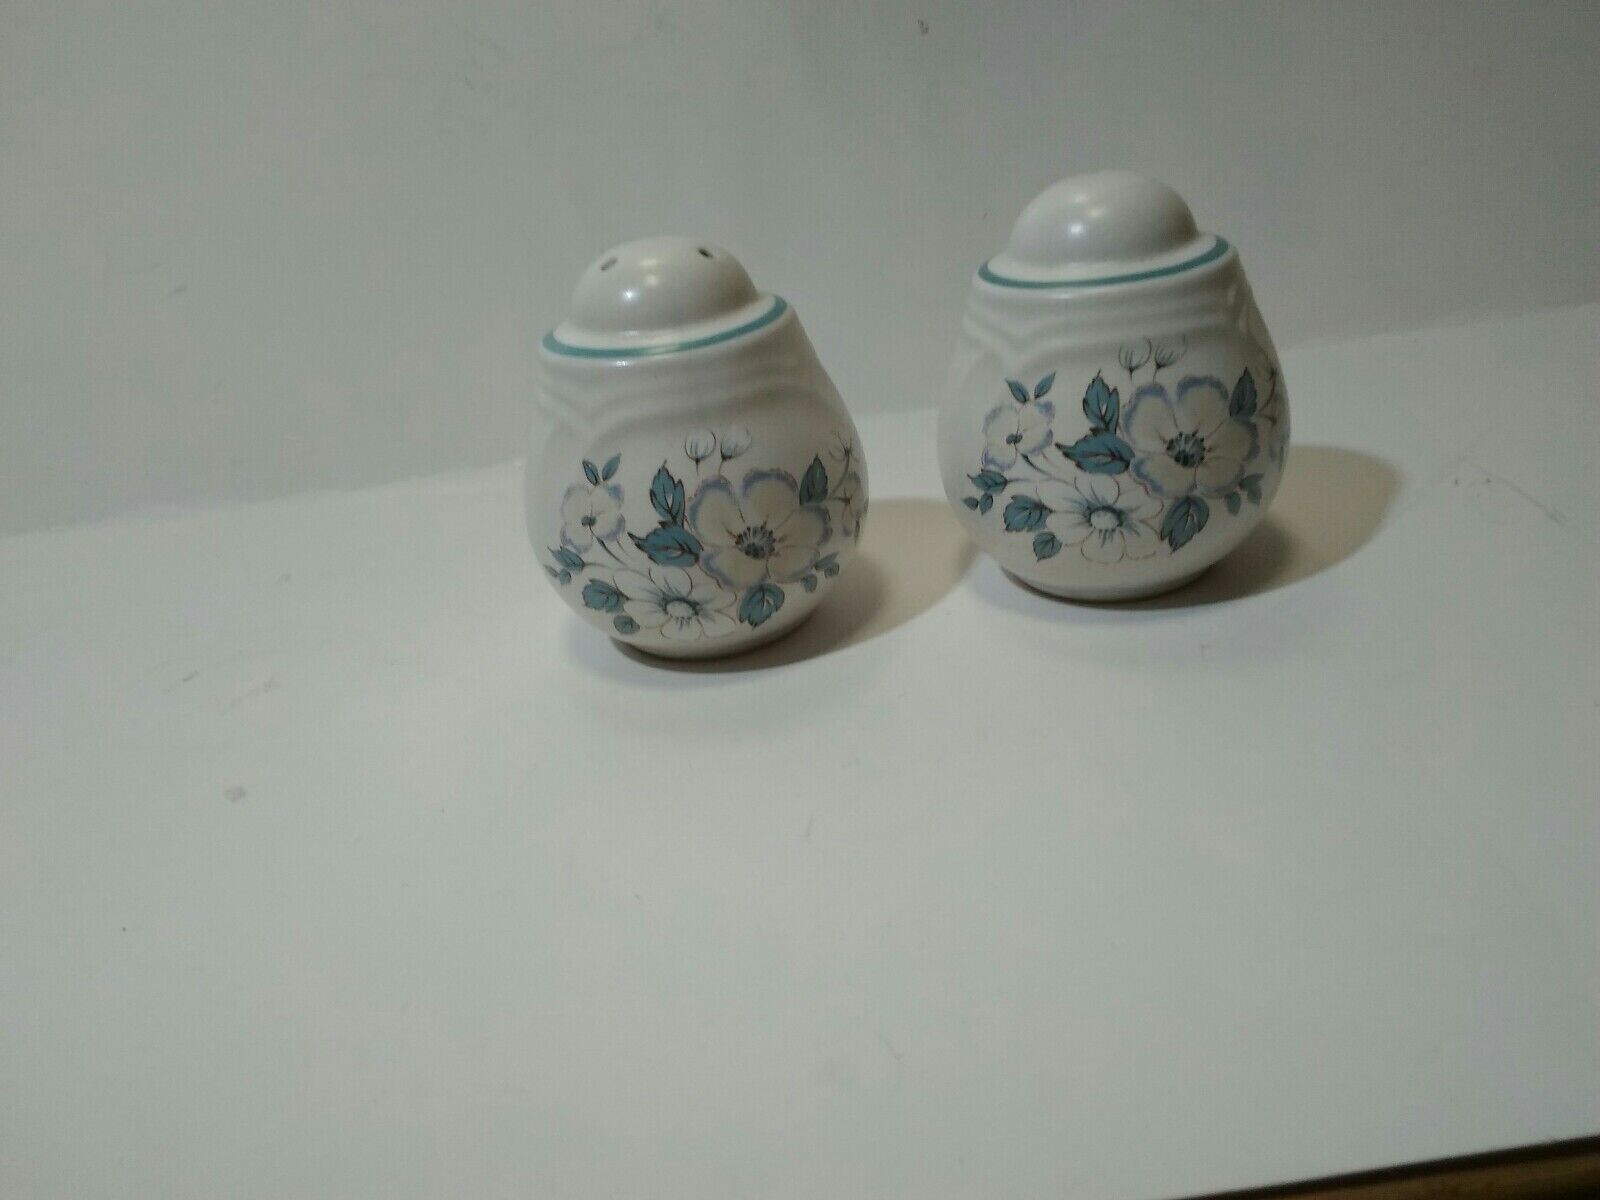 Vintage Replacement Salt And Pepper Shakers Ashberry Pattern By Country Ware.